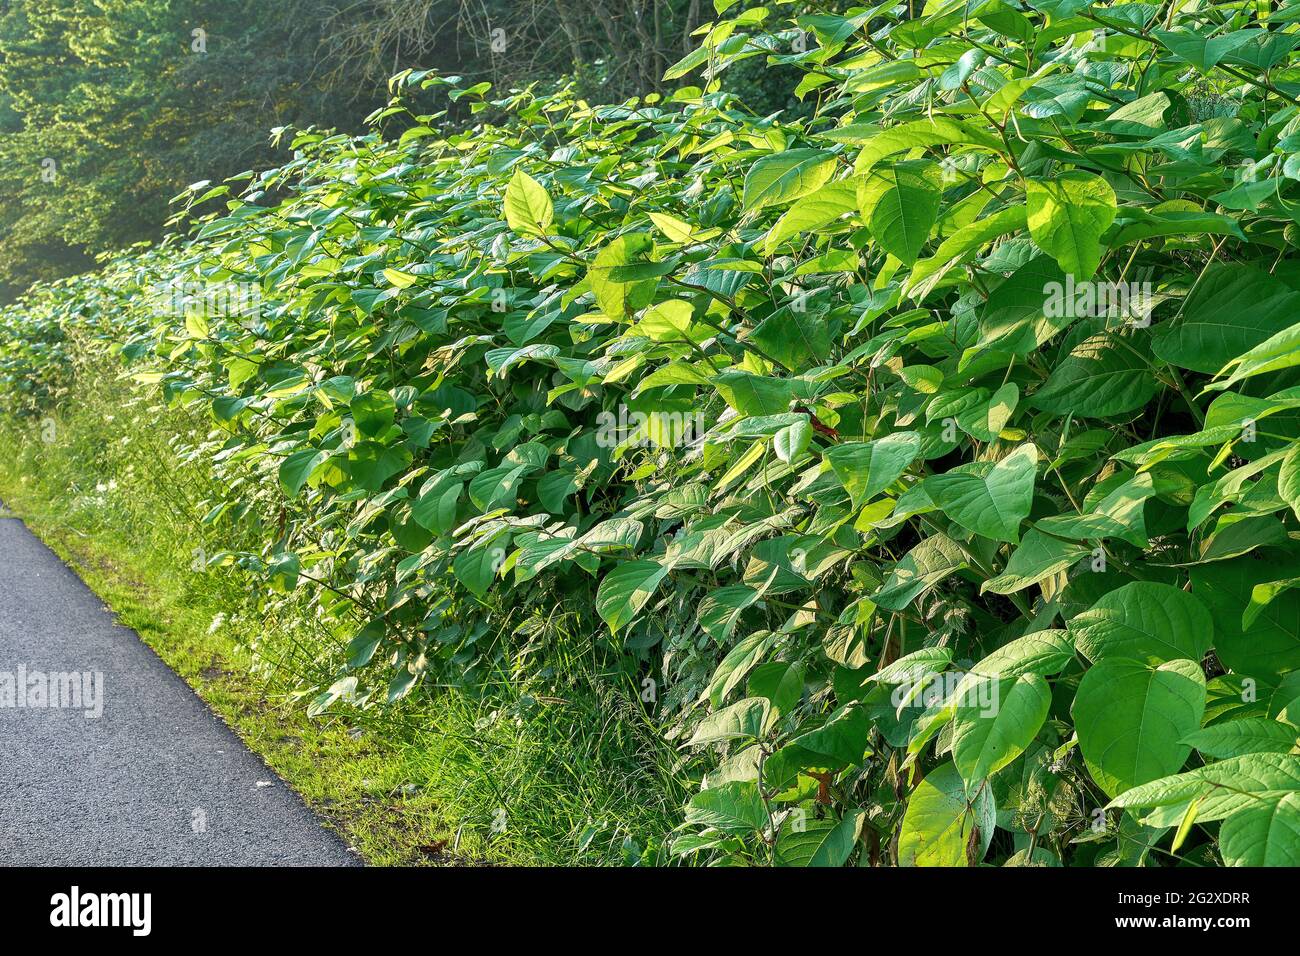 Japanese knotweed, Asian knotweed (Reynoutria japonica) Stock Photo